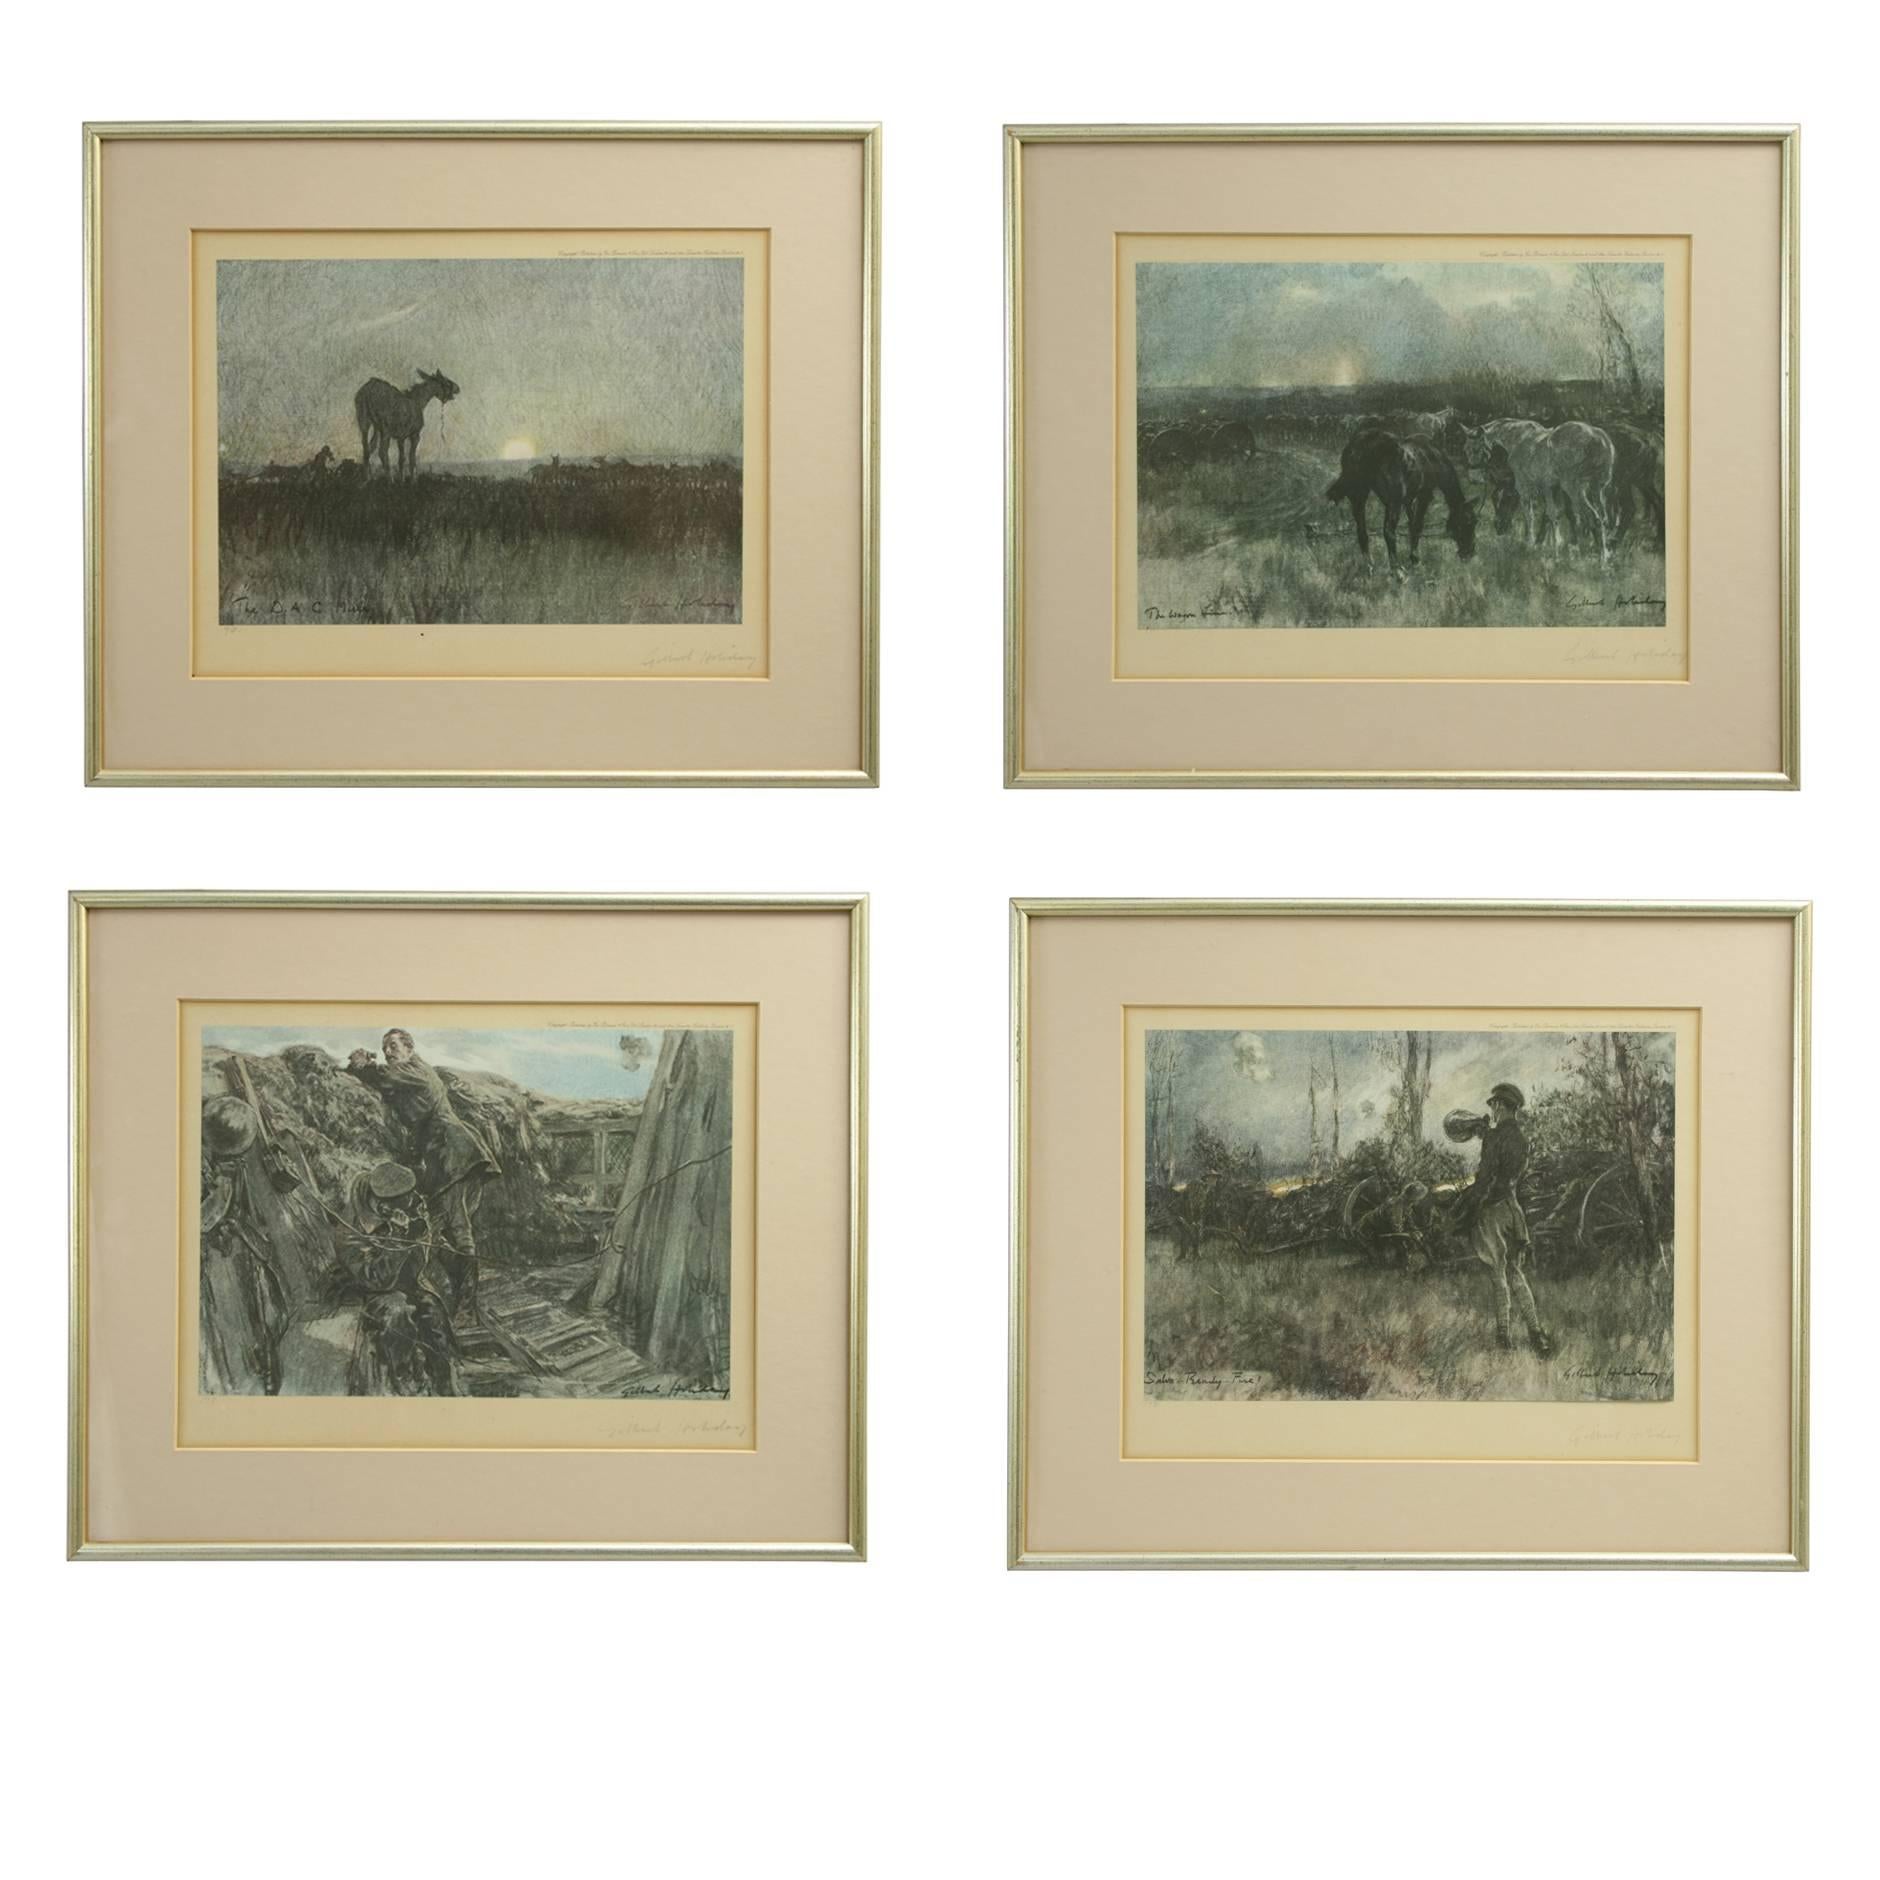 A very rare complete set of four Gilbert Holiday first WW scenes. The photolithographic images are mounted onto Sub sheets and are all signed in pencil by the artist. They are all framed and in good order, published circa 1916-1917. Printed onto the